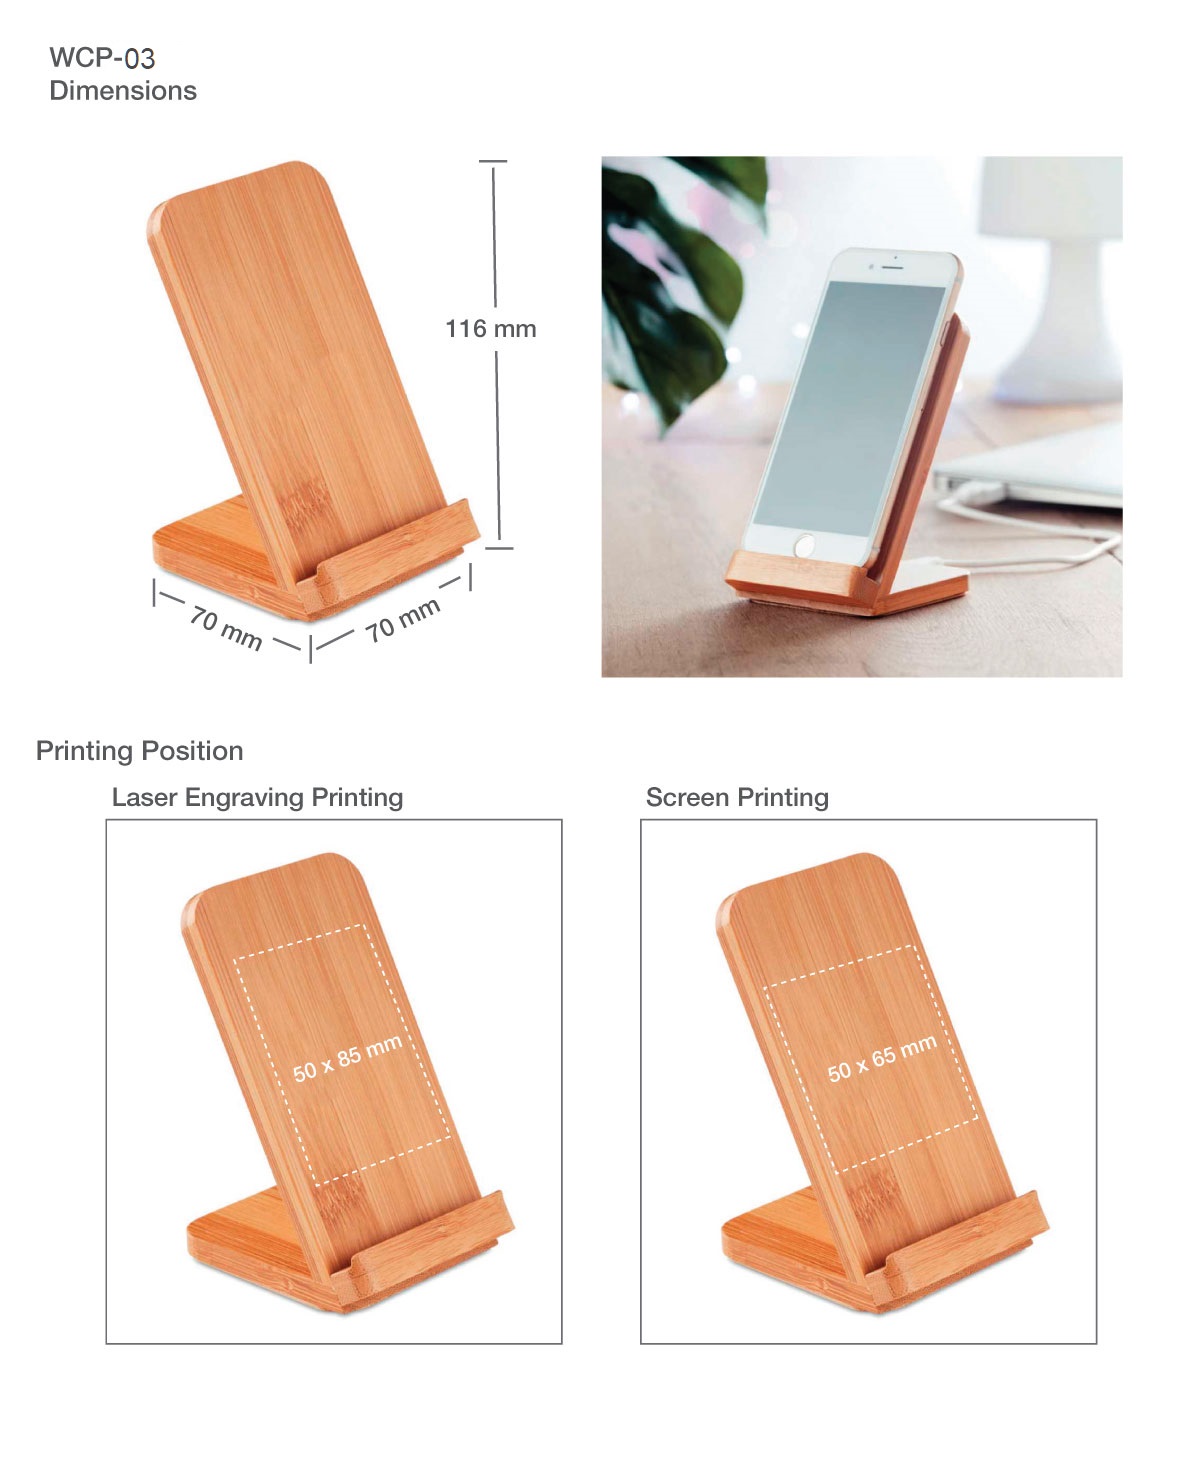 Wireless-Charger-WCP-03